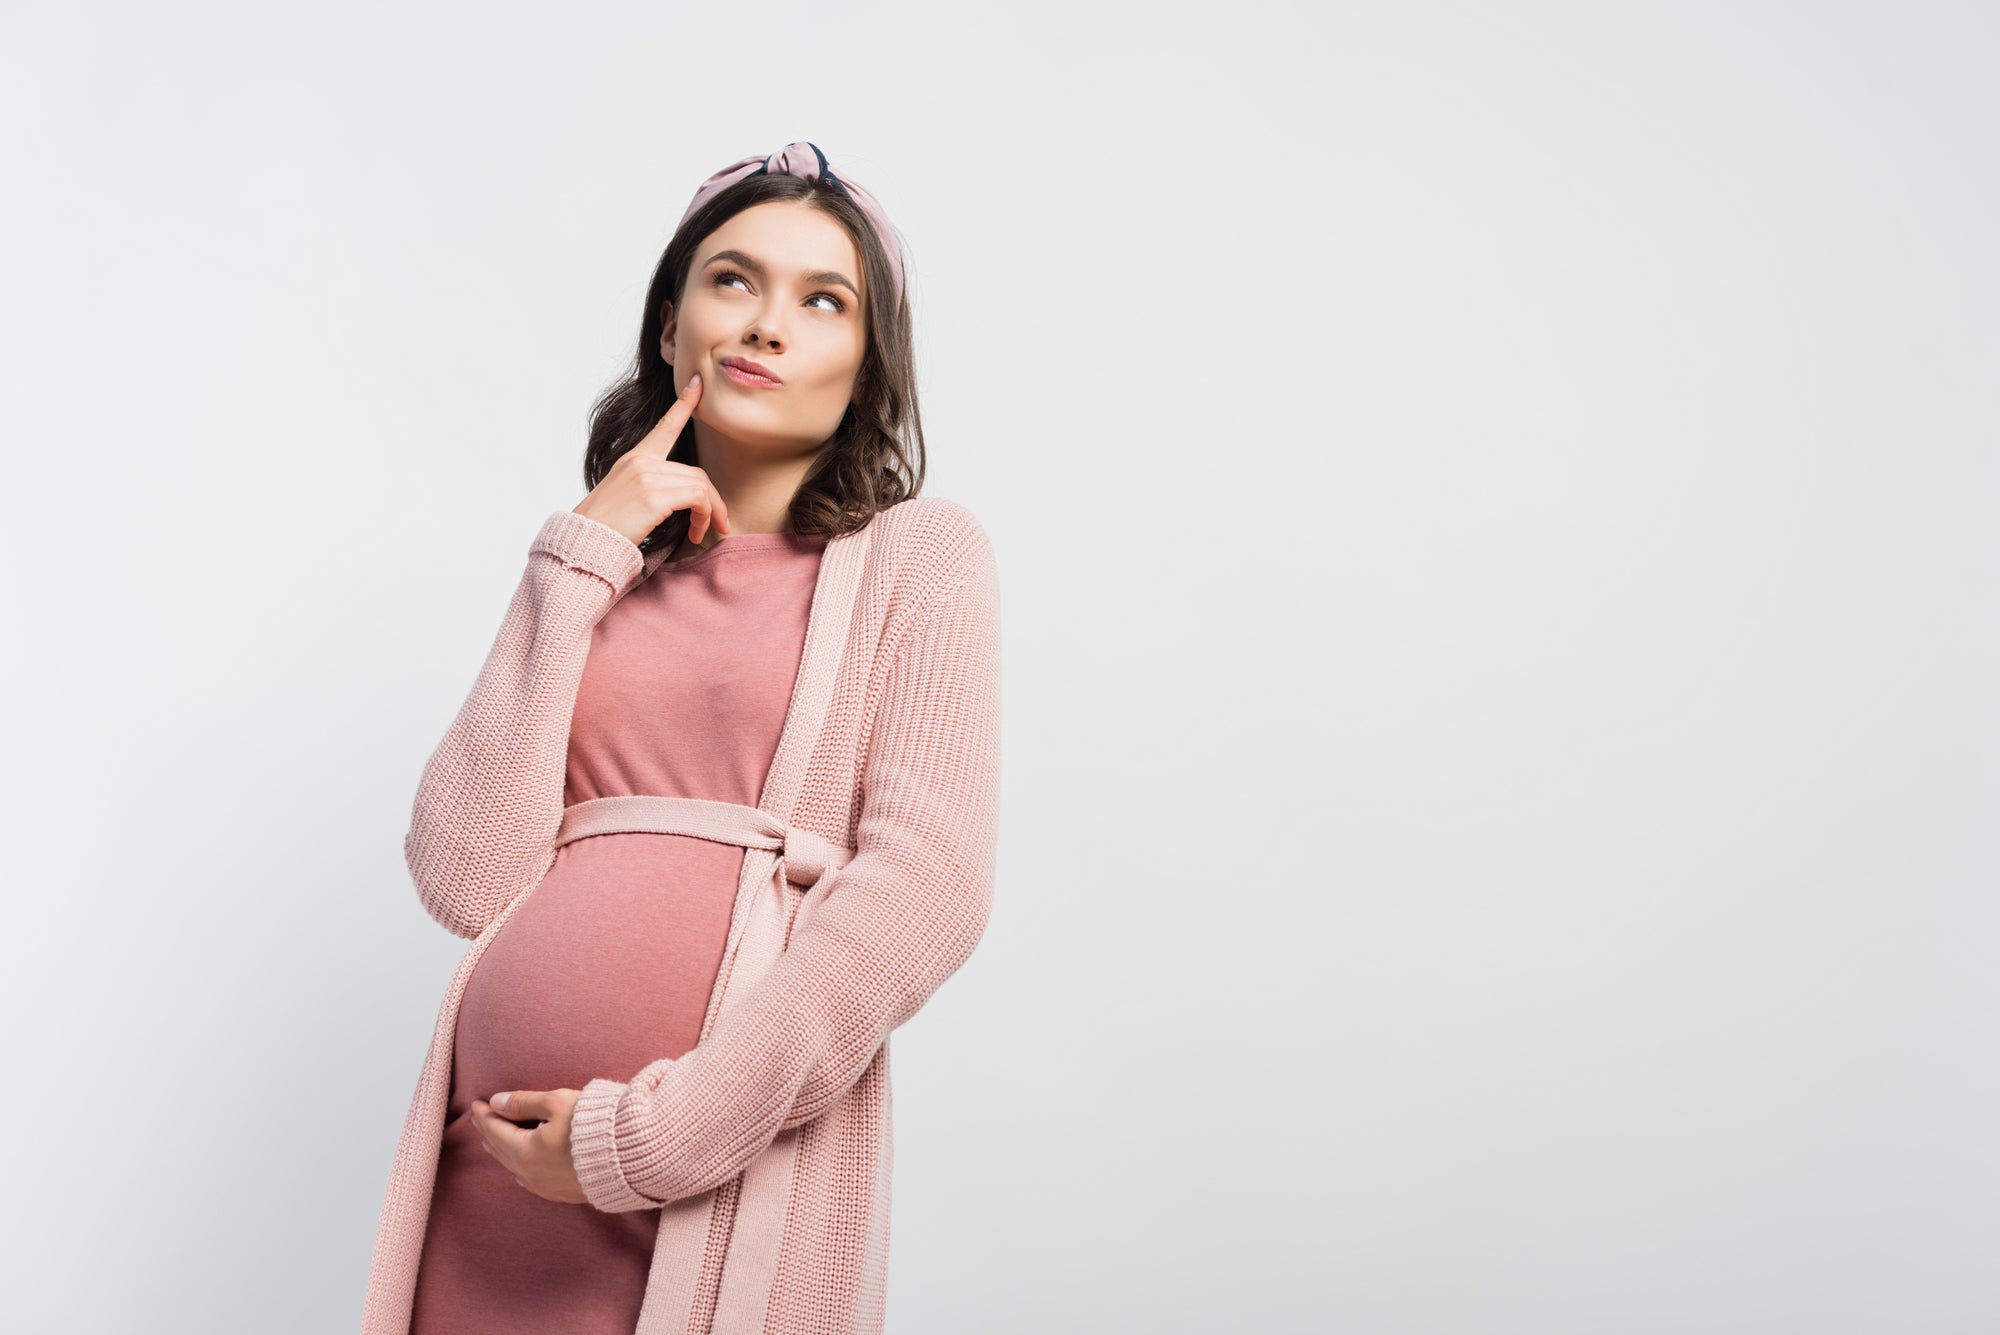 8 Pregnancy-Safe Beauty Products Every Expectant Mother Needs - Mommy's  Bundle